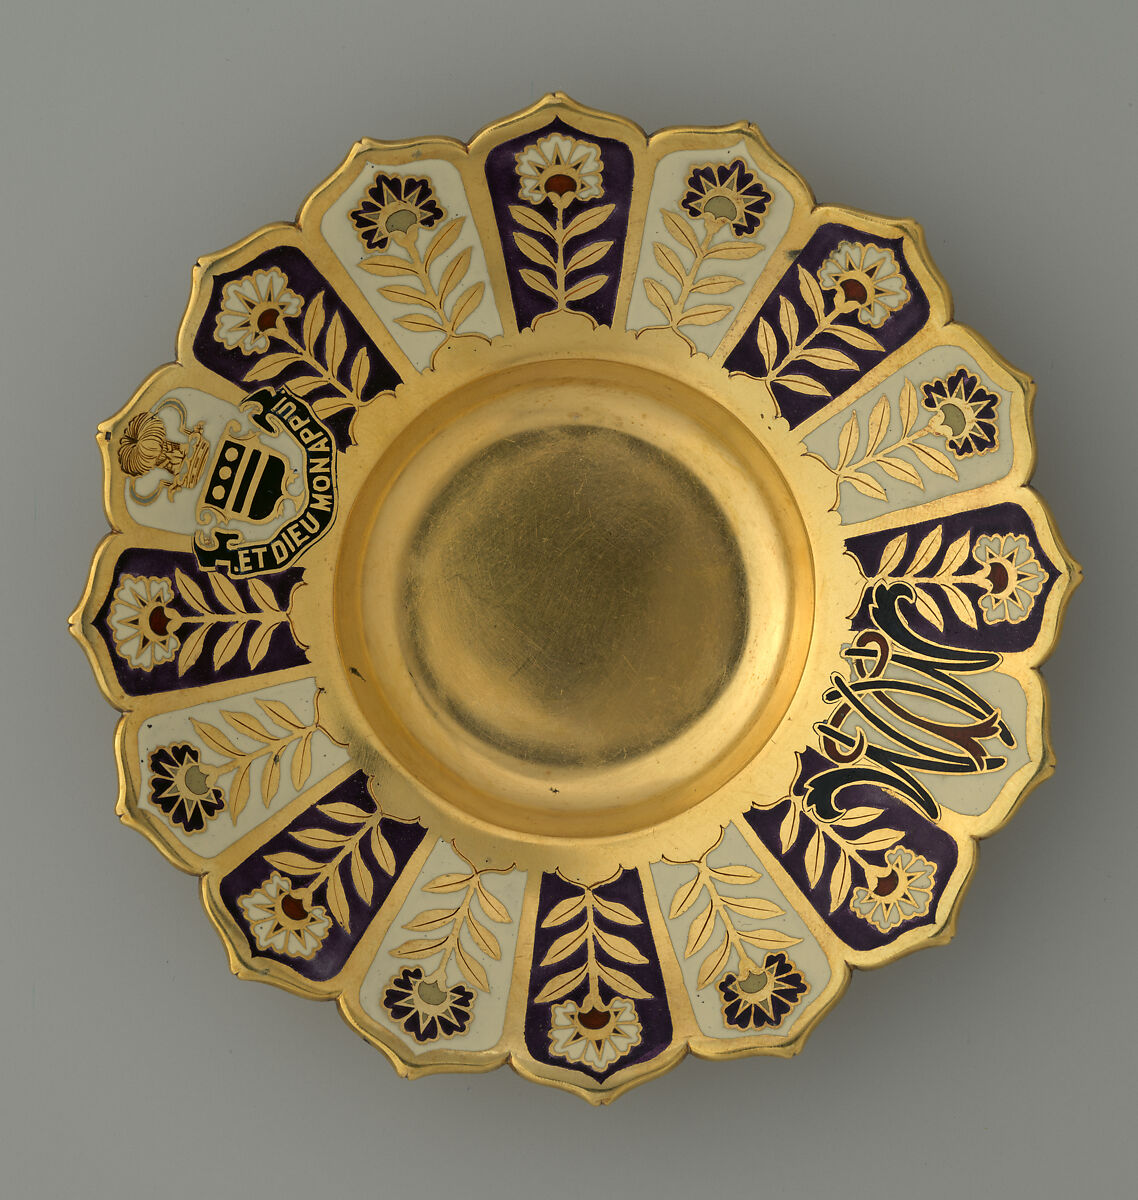 Saucer from the Mackay Service, Tiffany &amp; Co. (1837–present), Silver-gilt and enamel, American 